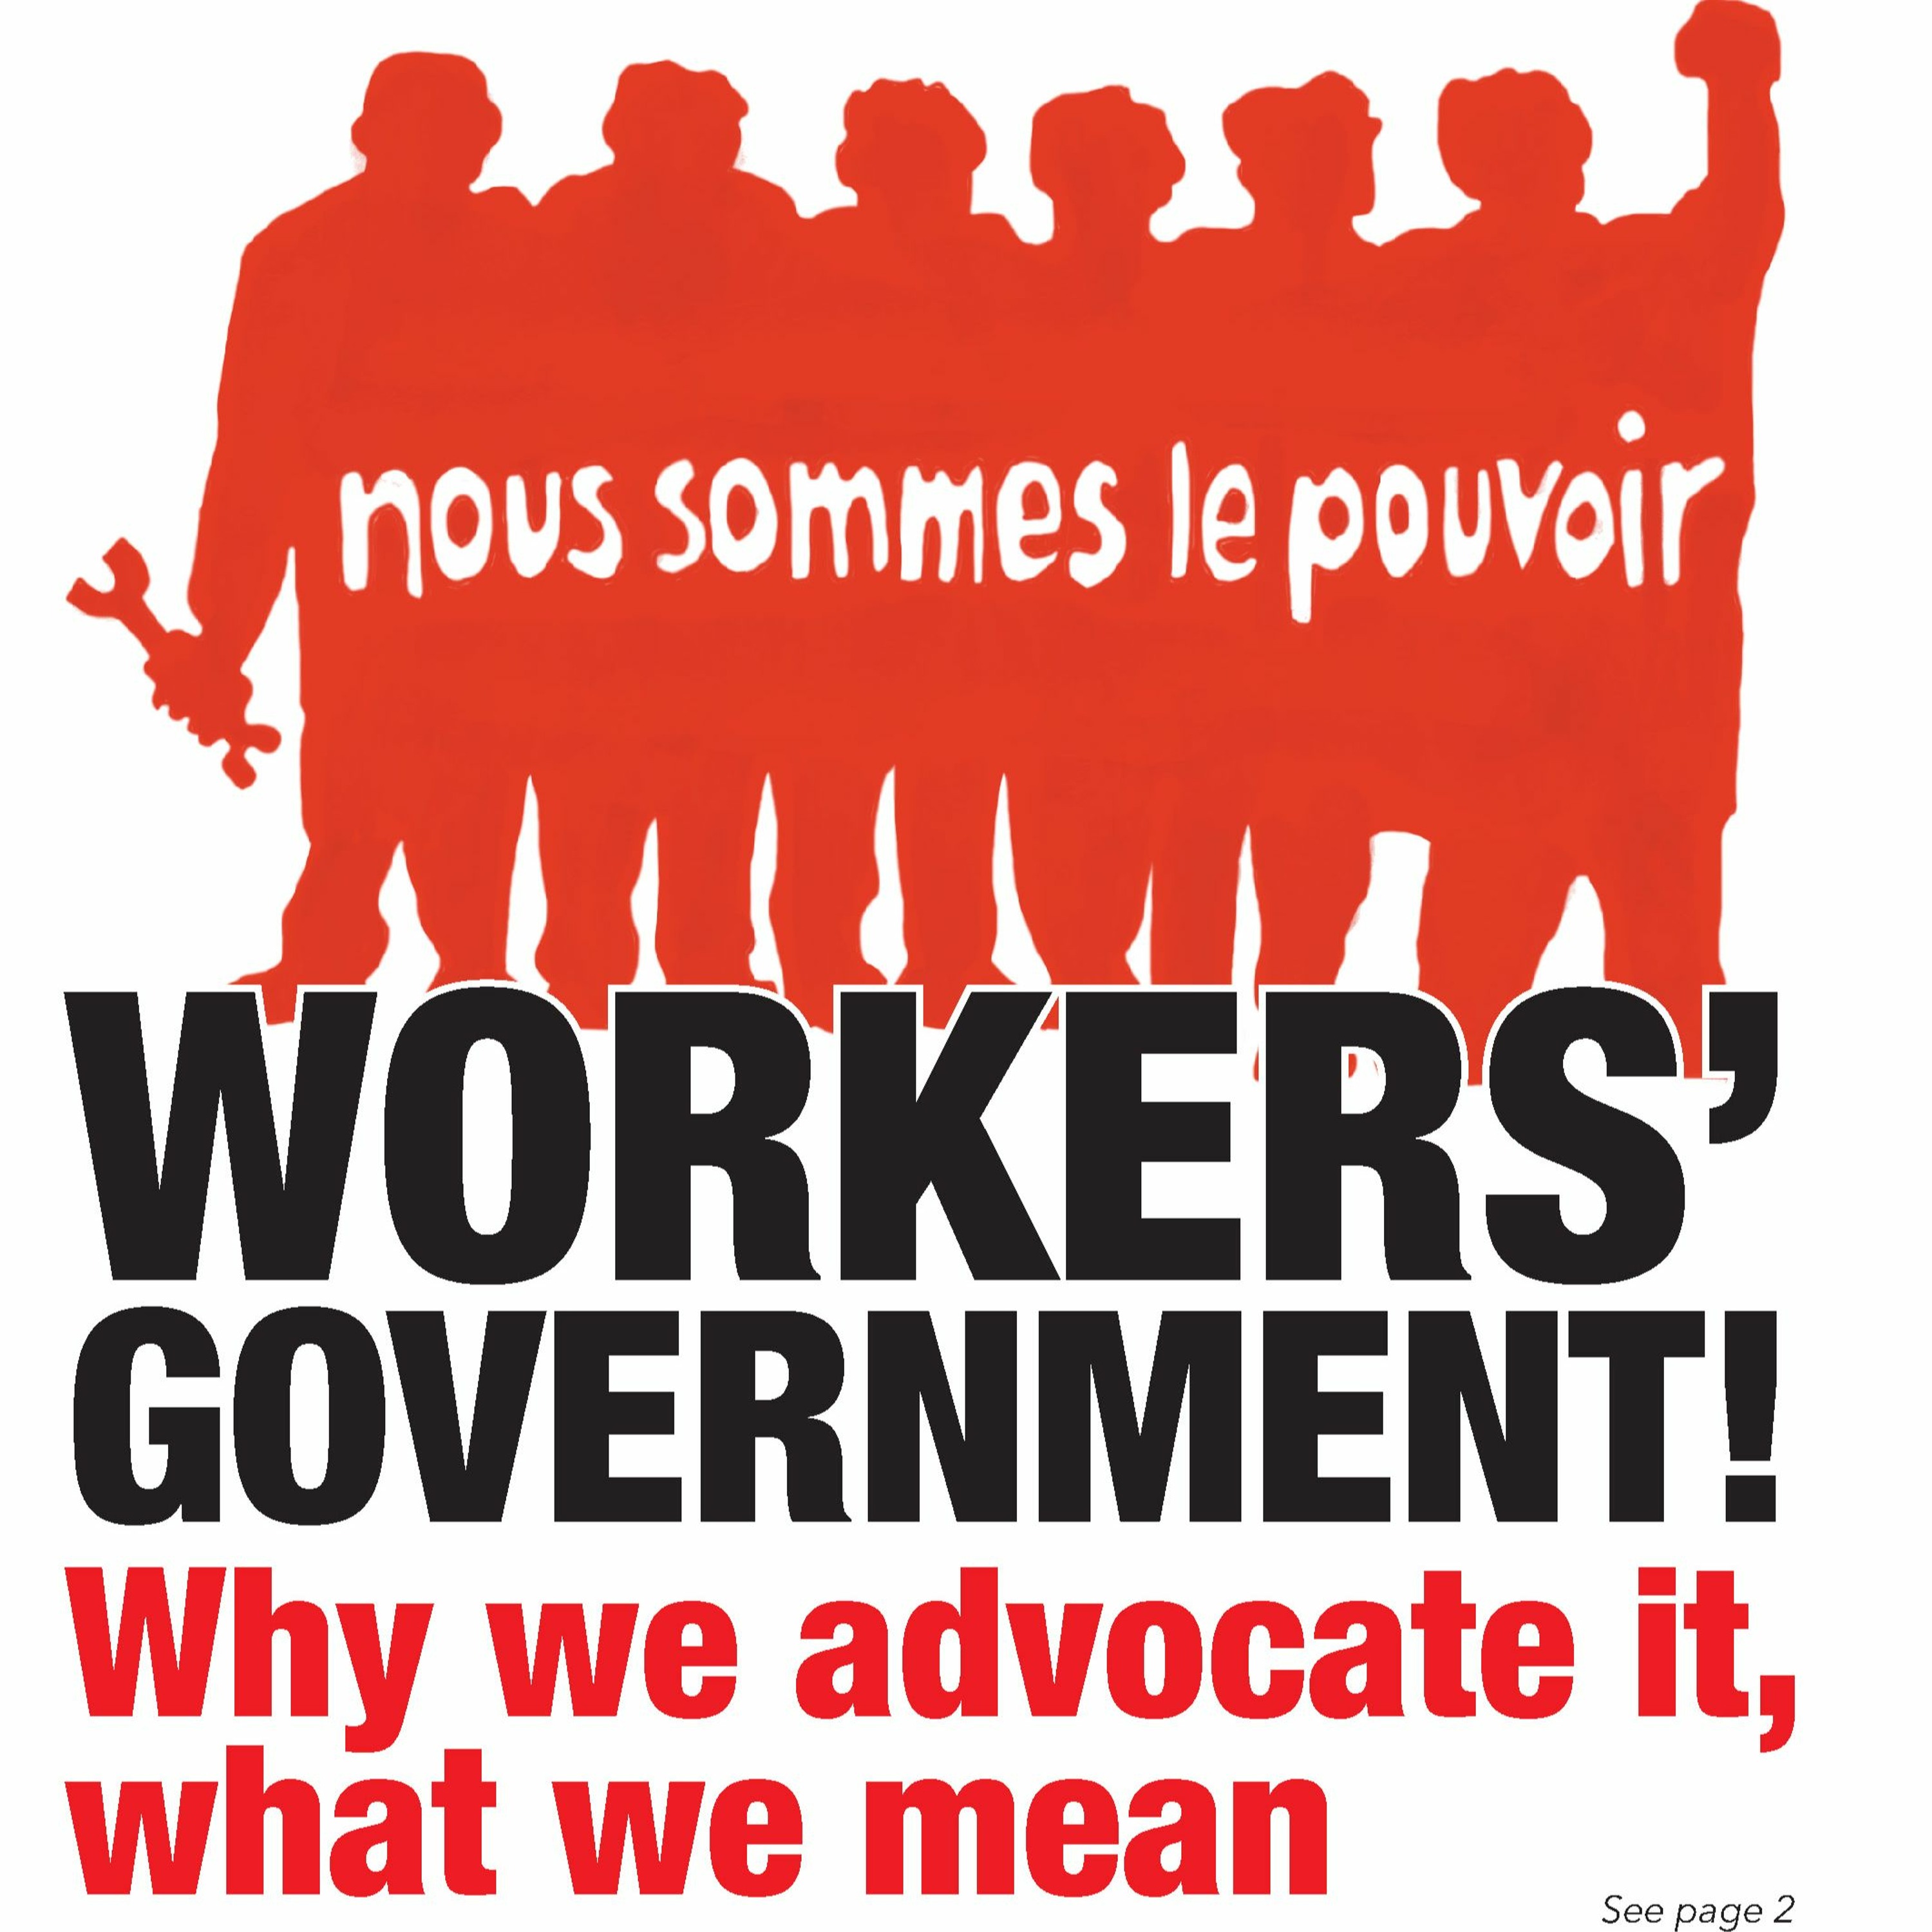 702 — Workers’ government: Why we advocate it, what we mean | Russia | Galloway | Tipping points